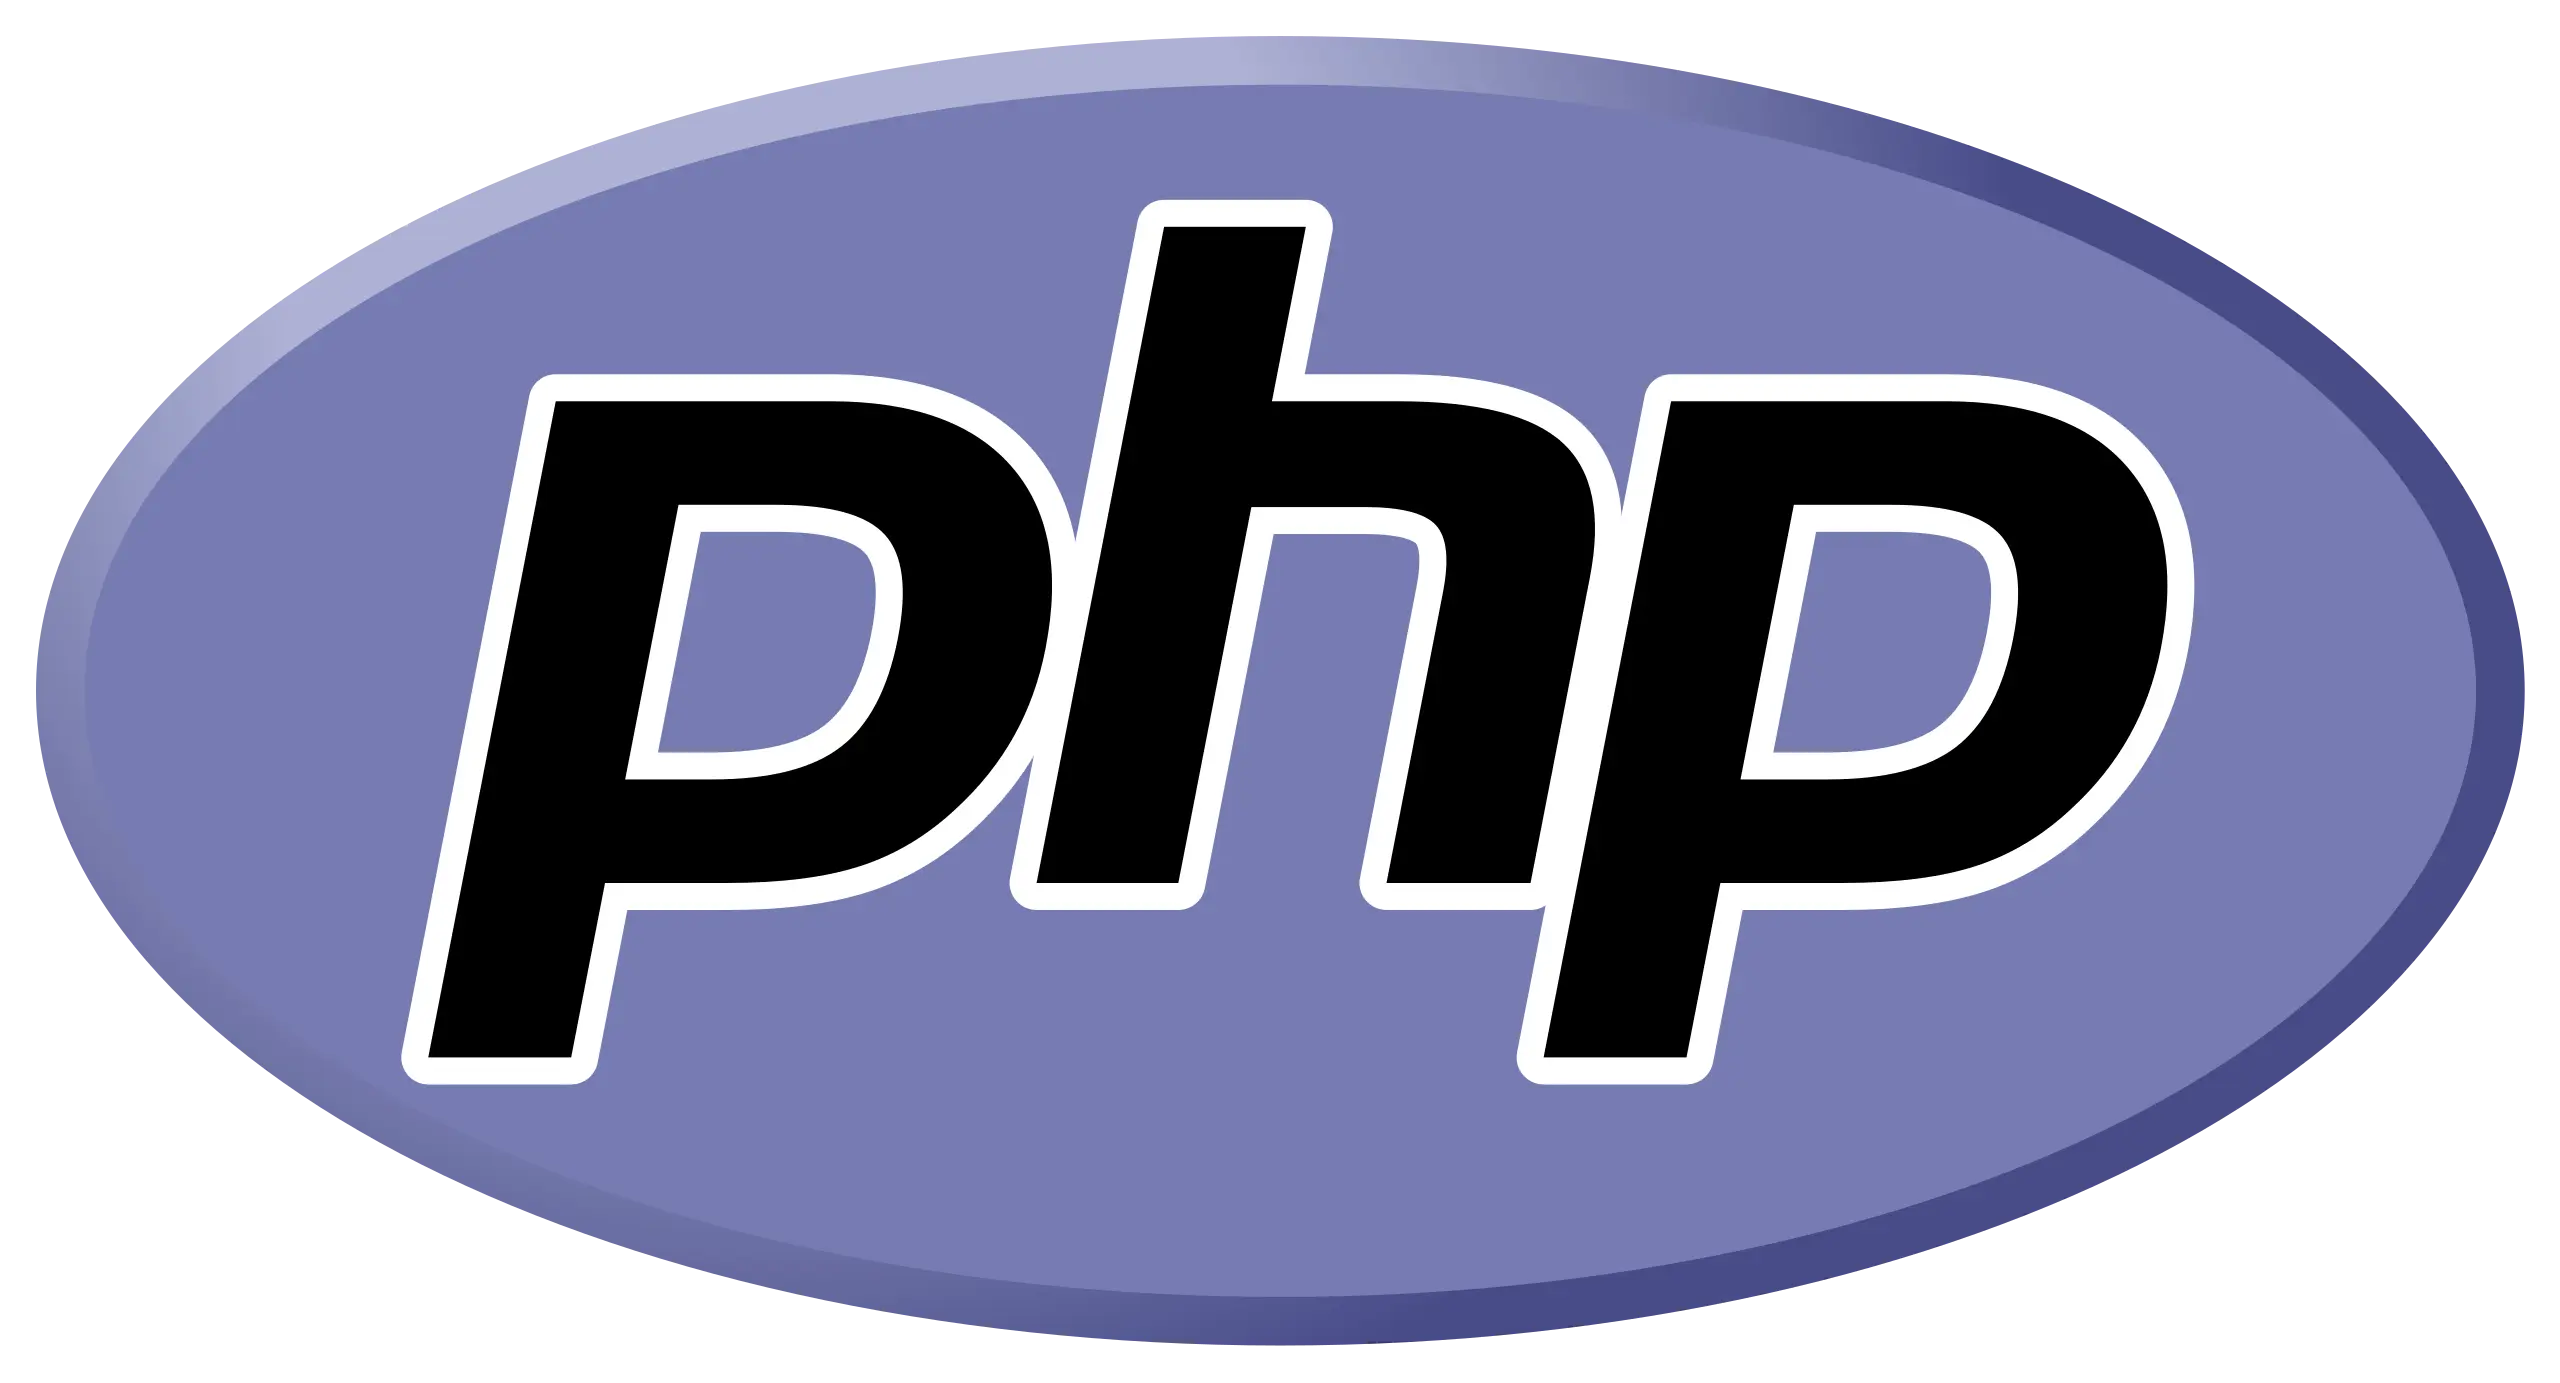 PHP | Expansers Technology